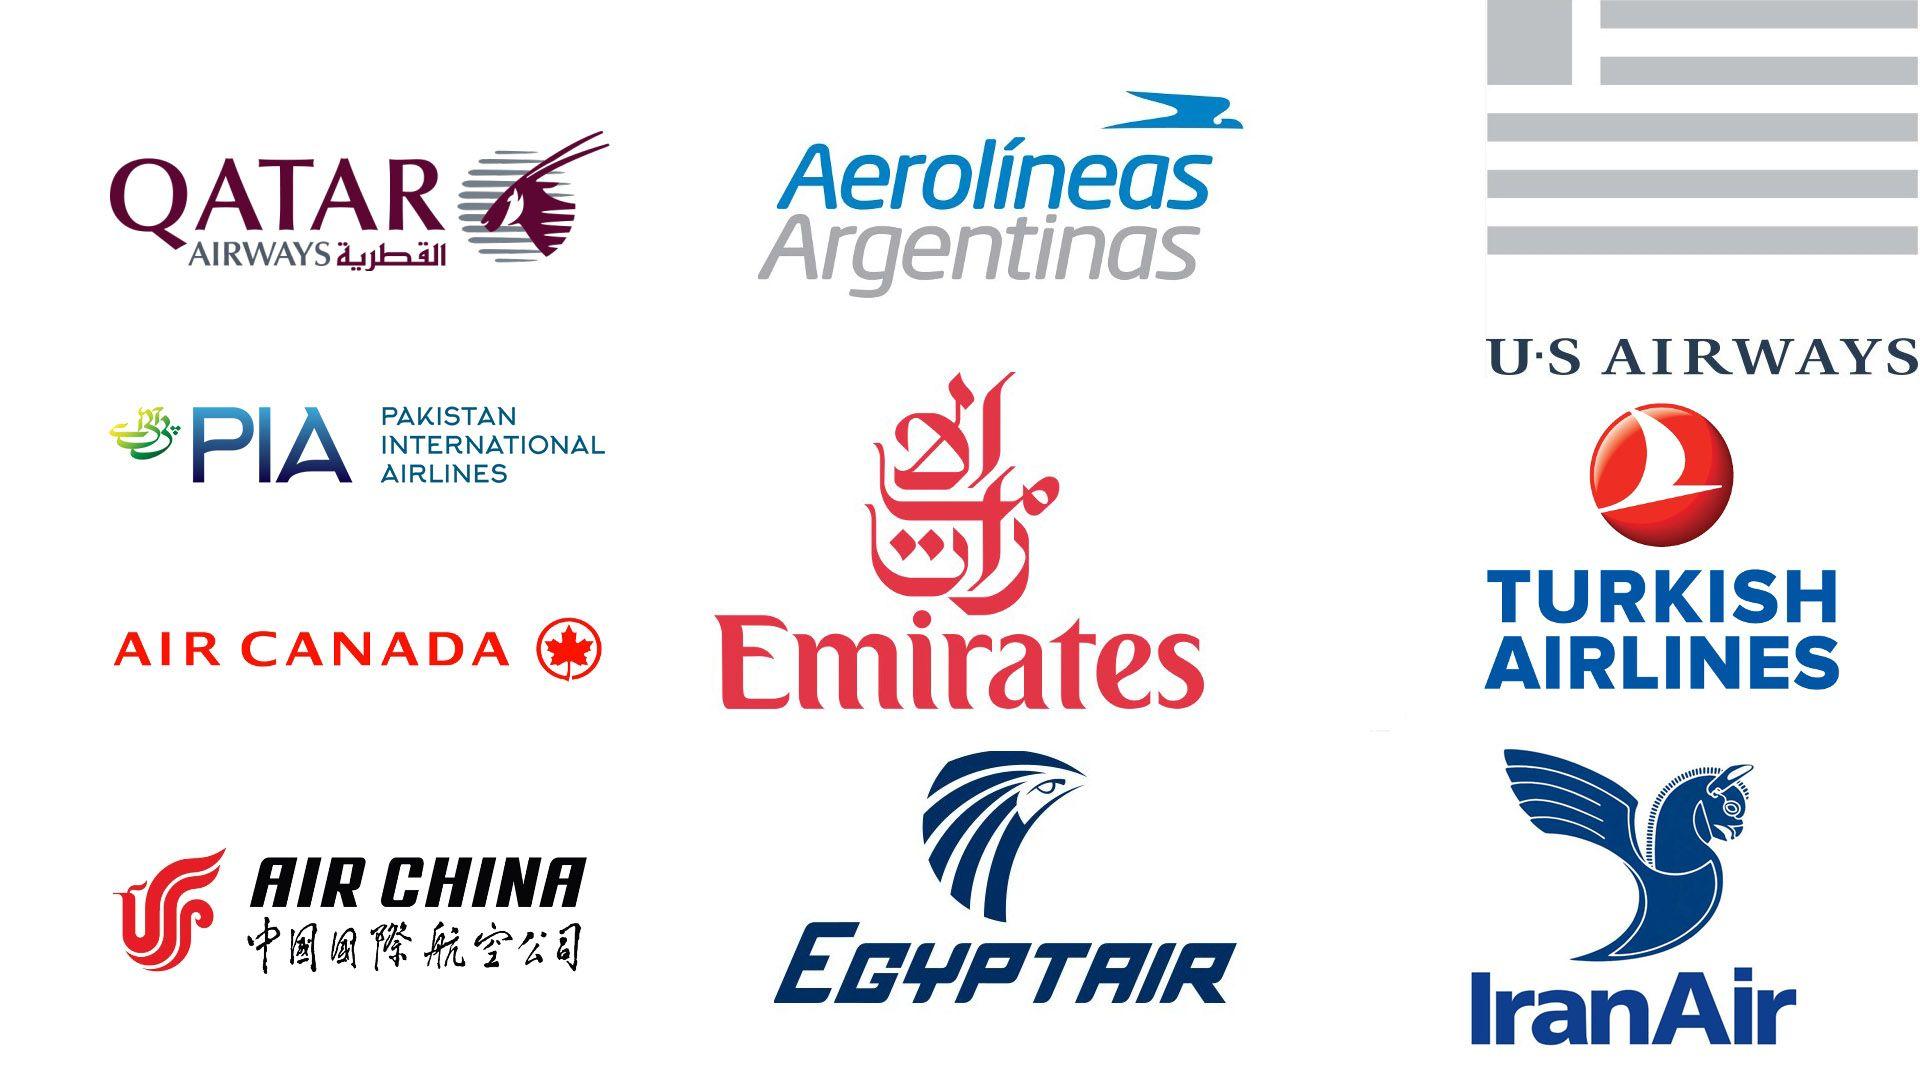 Most Famous Airline Logo - 37 Most Popular Airline Logos of the World – TechWafer